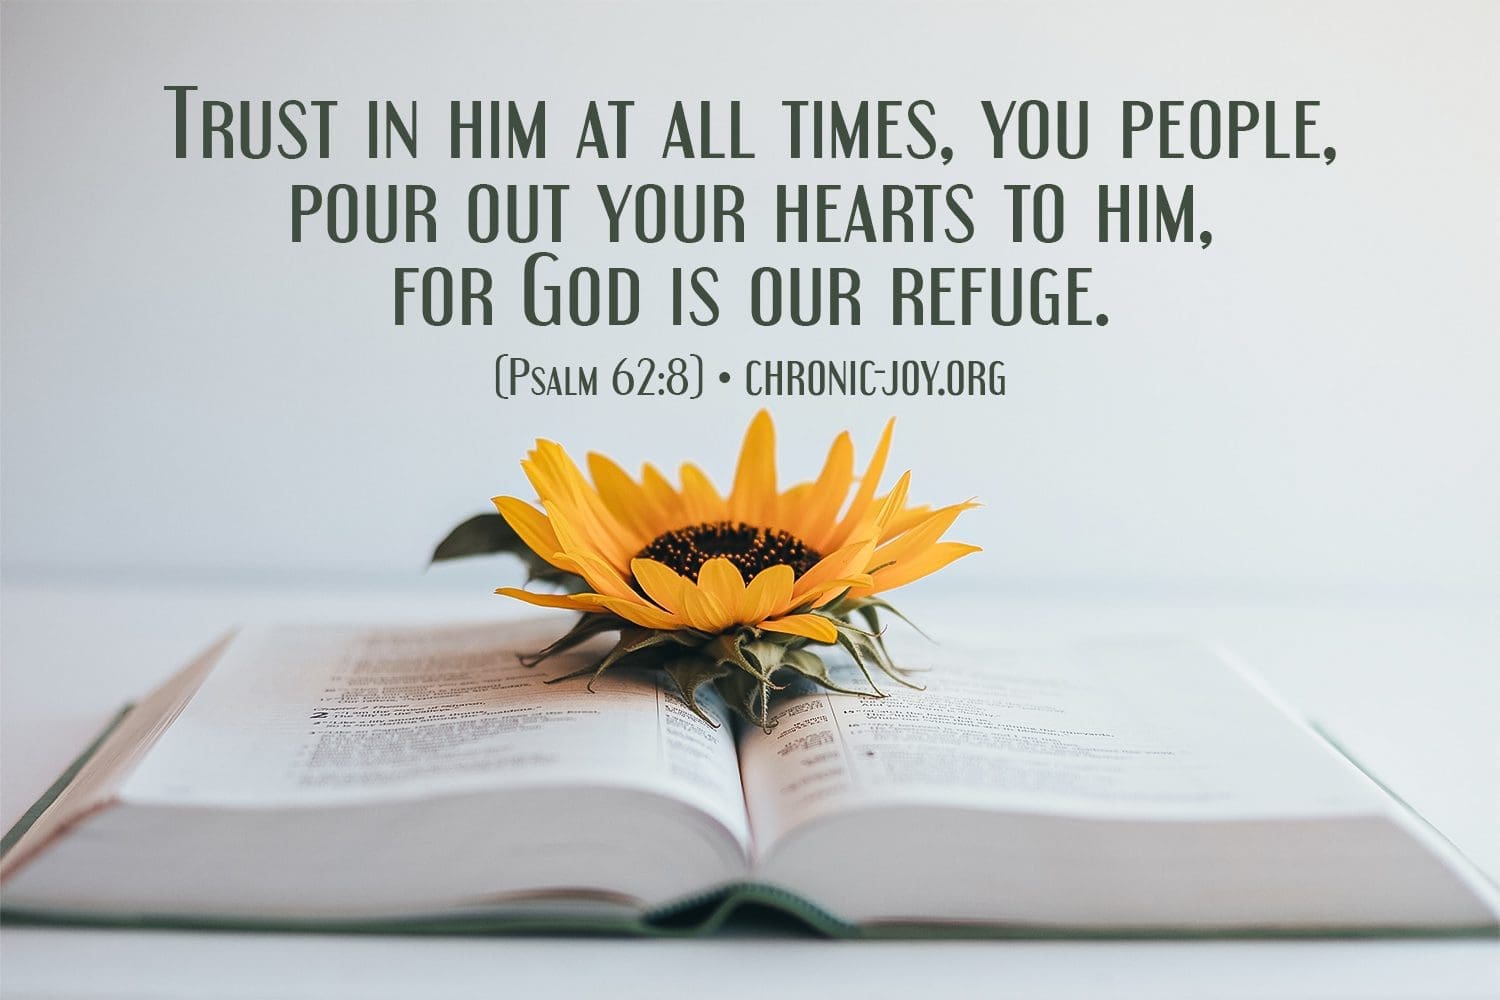 "Trust in him at all times, you people, pour out your hearts to him, for God is our refuge." (Psalm 62:8)